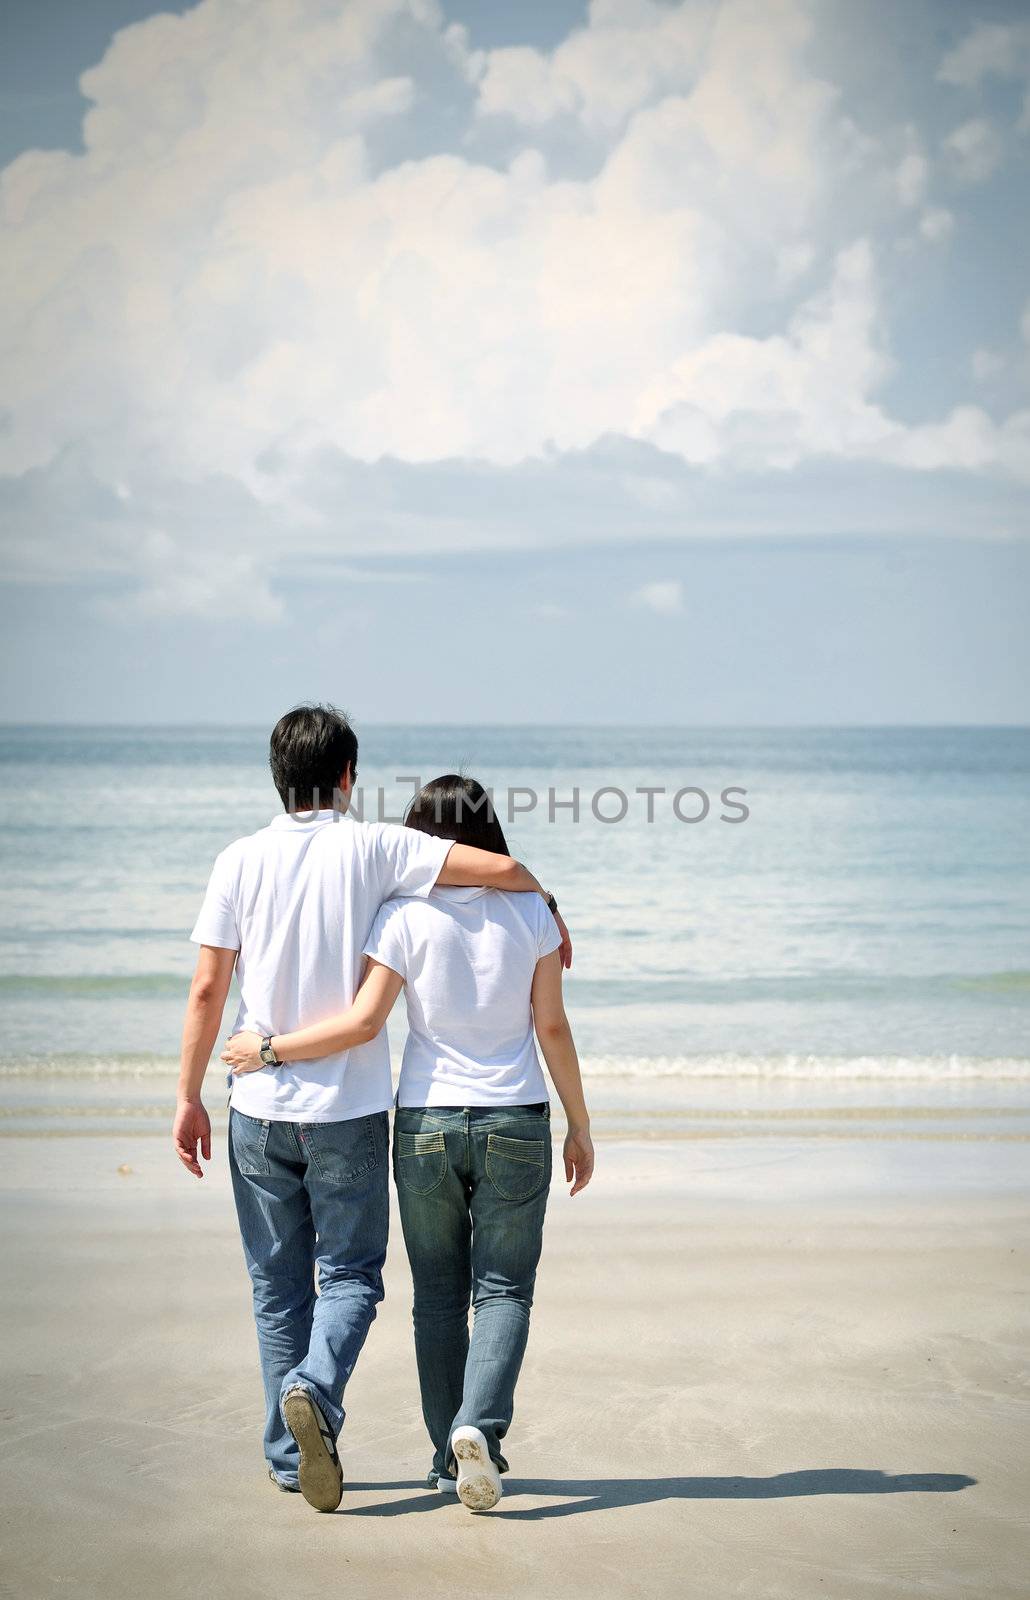 romantic couples walking together on the beach